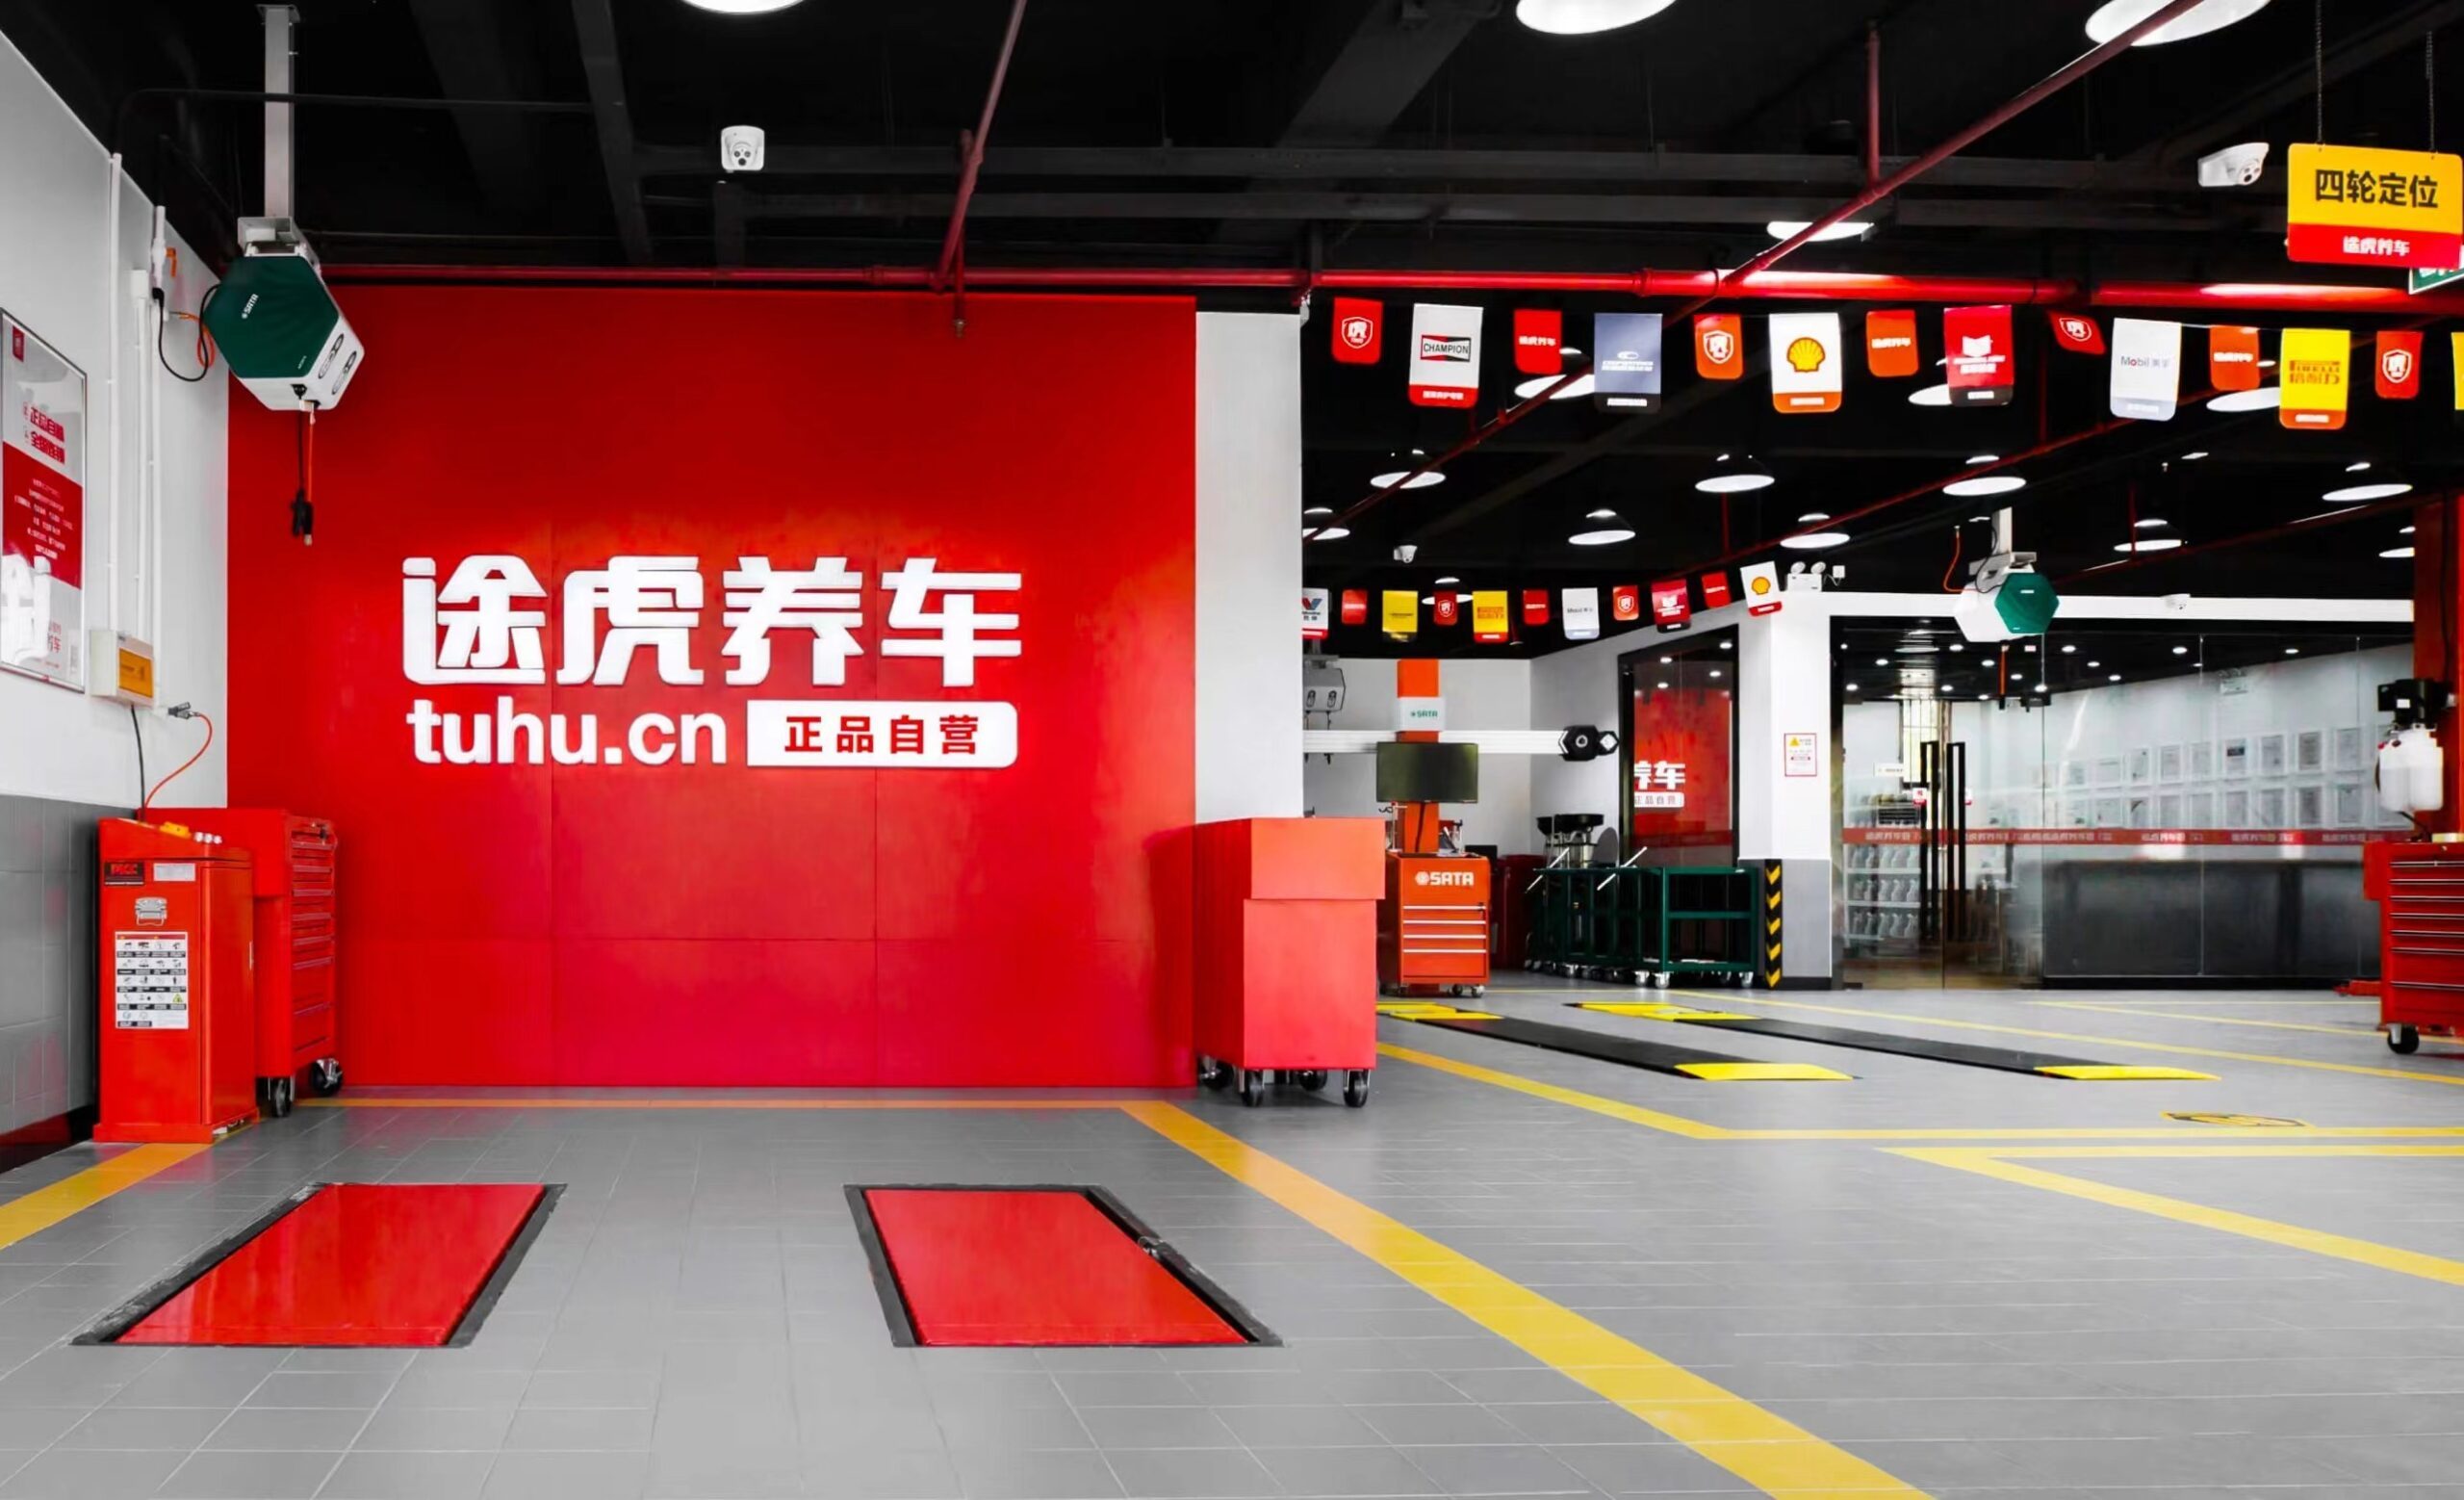 Tencent-backed car services platform Tuhu wins approval for Hong Kong IPO